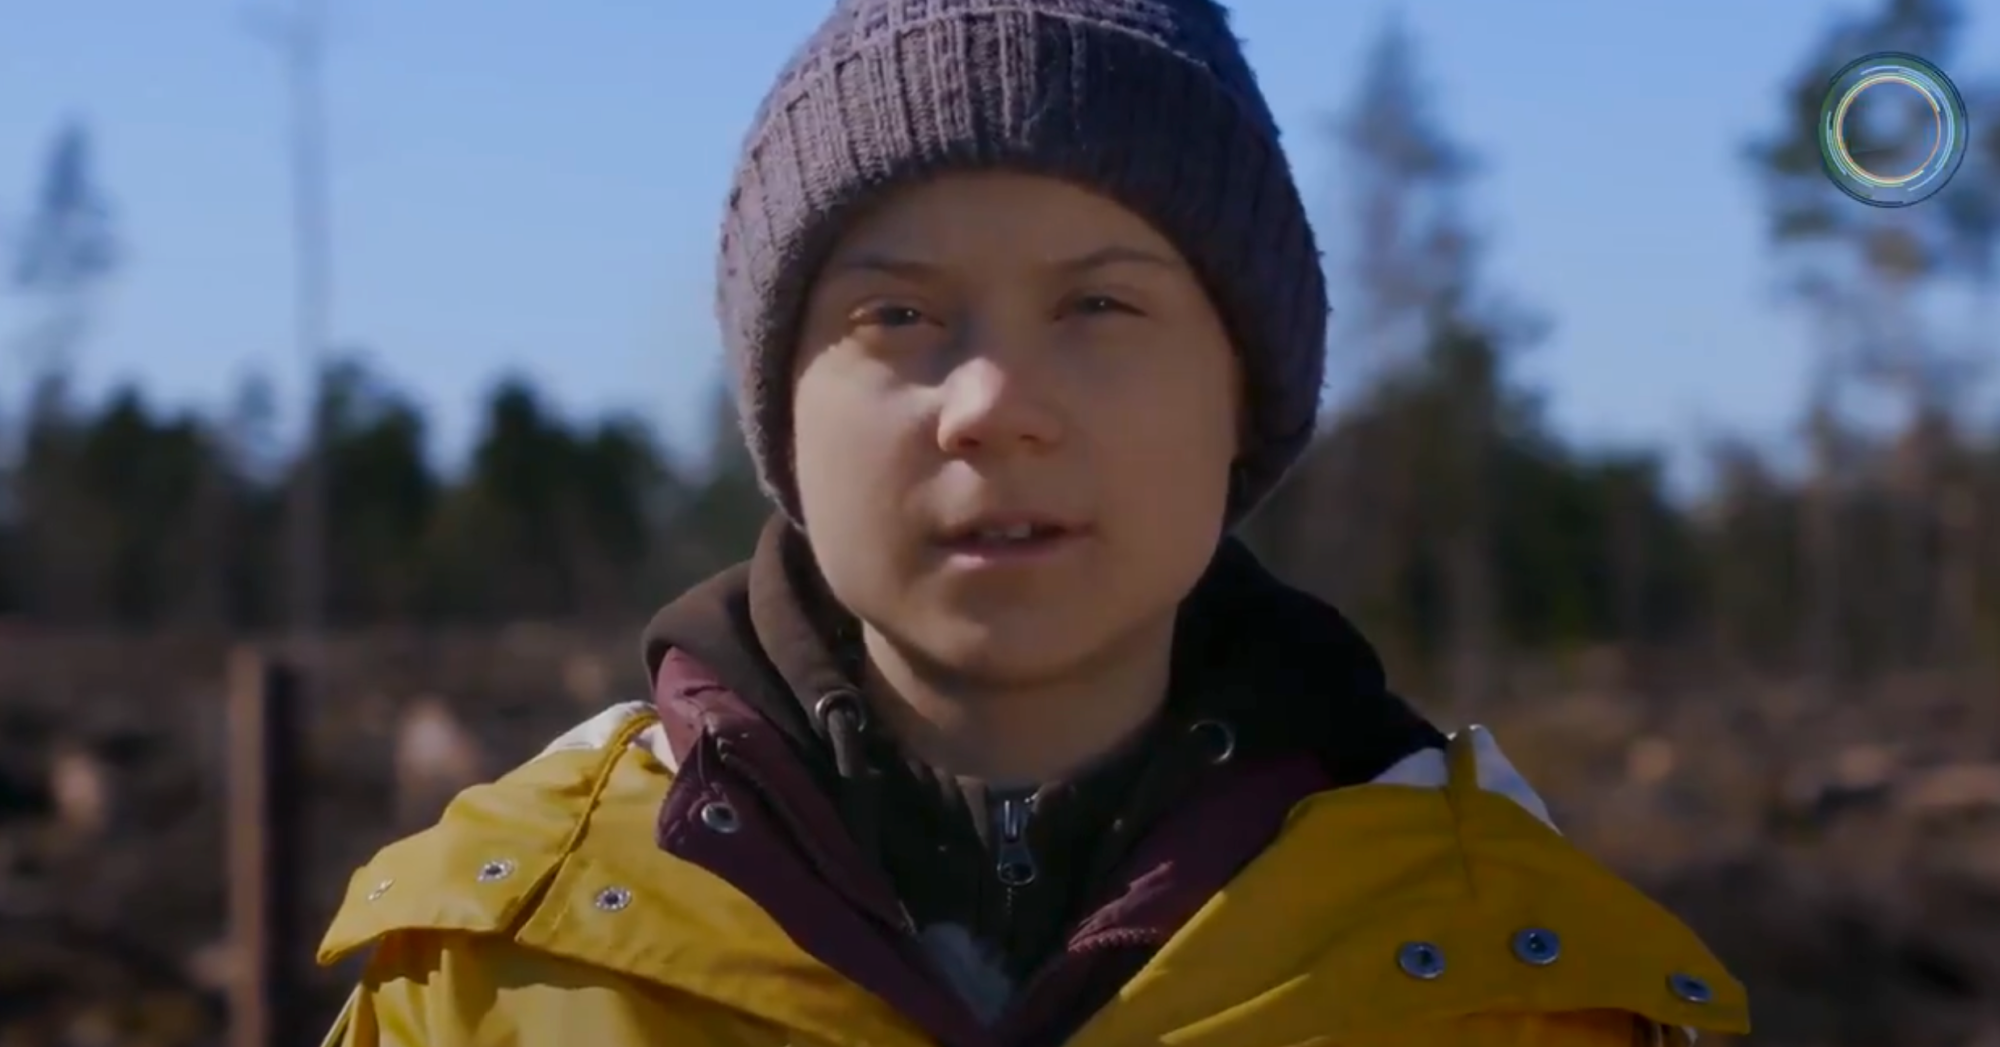 Climate campaigner Greta Thunberg in a video released shortly before the Biden administration kicked off a two-day virtual summit of international leaders to address the climate crisis. "The gap between what needs to be done and what we are actually doing is widening by the minute," says Thunberg. "The gap between the urgency needed and the current level of awareness and attention is becoming more and more absurd." (Photo: Screenshot/NowThis News)